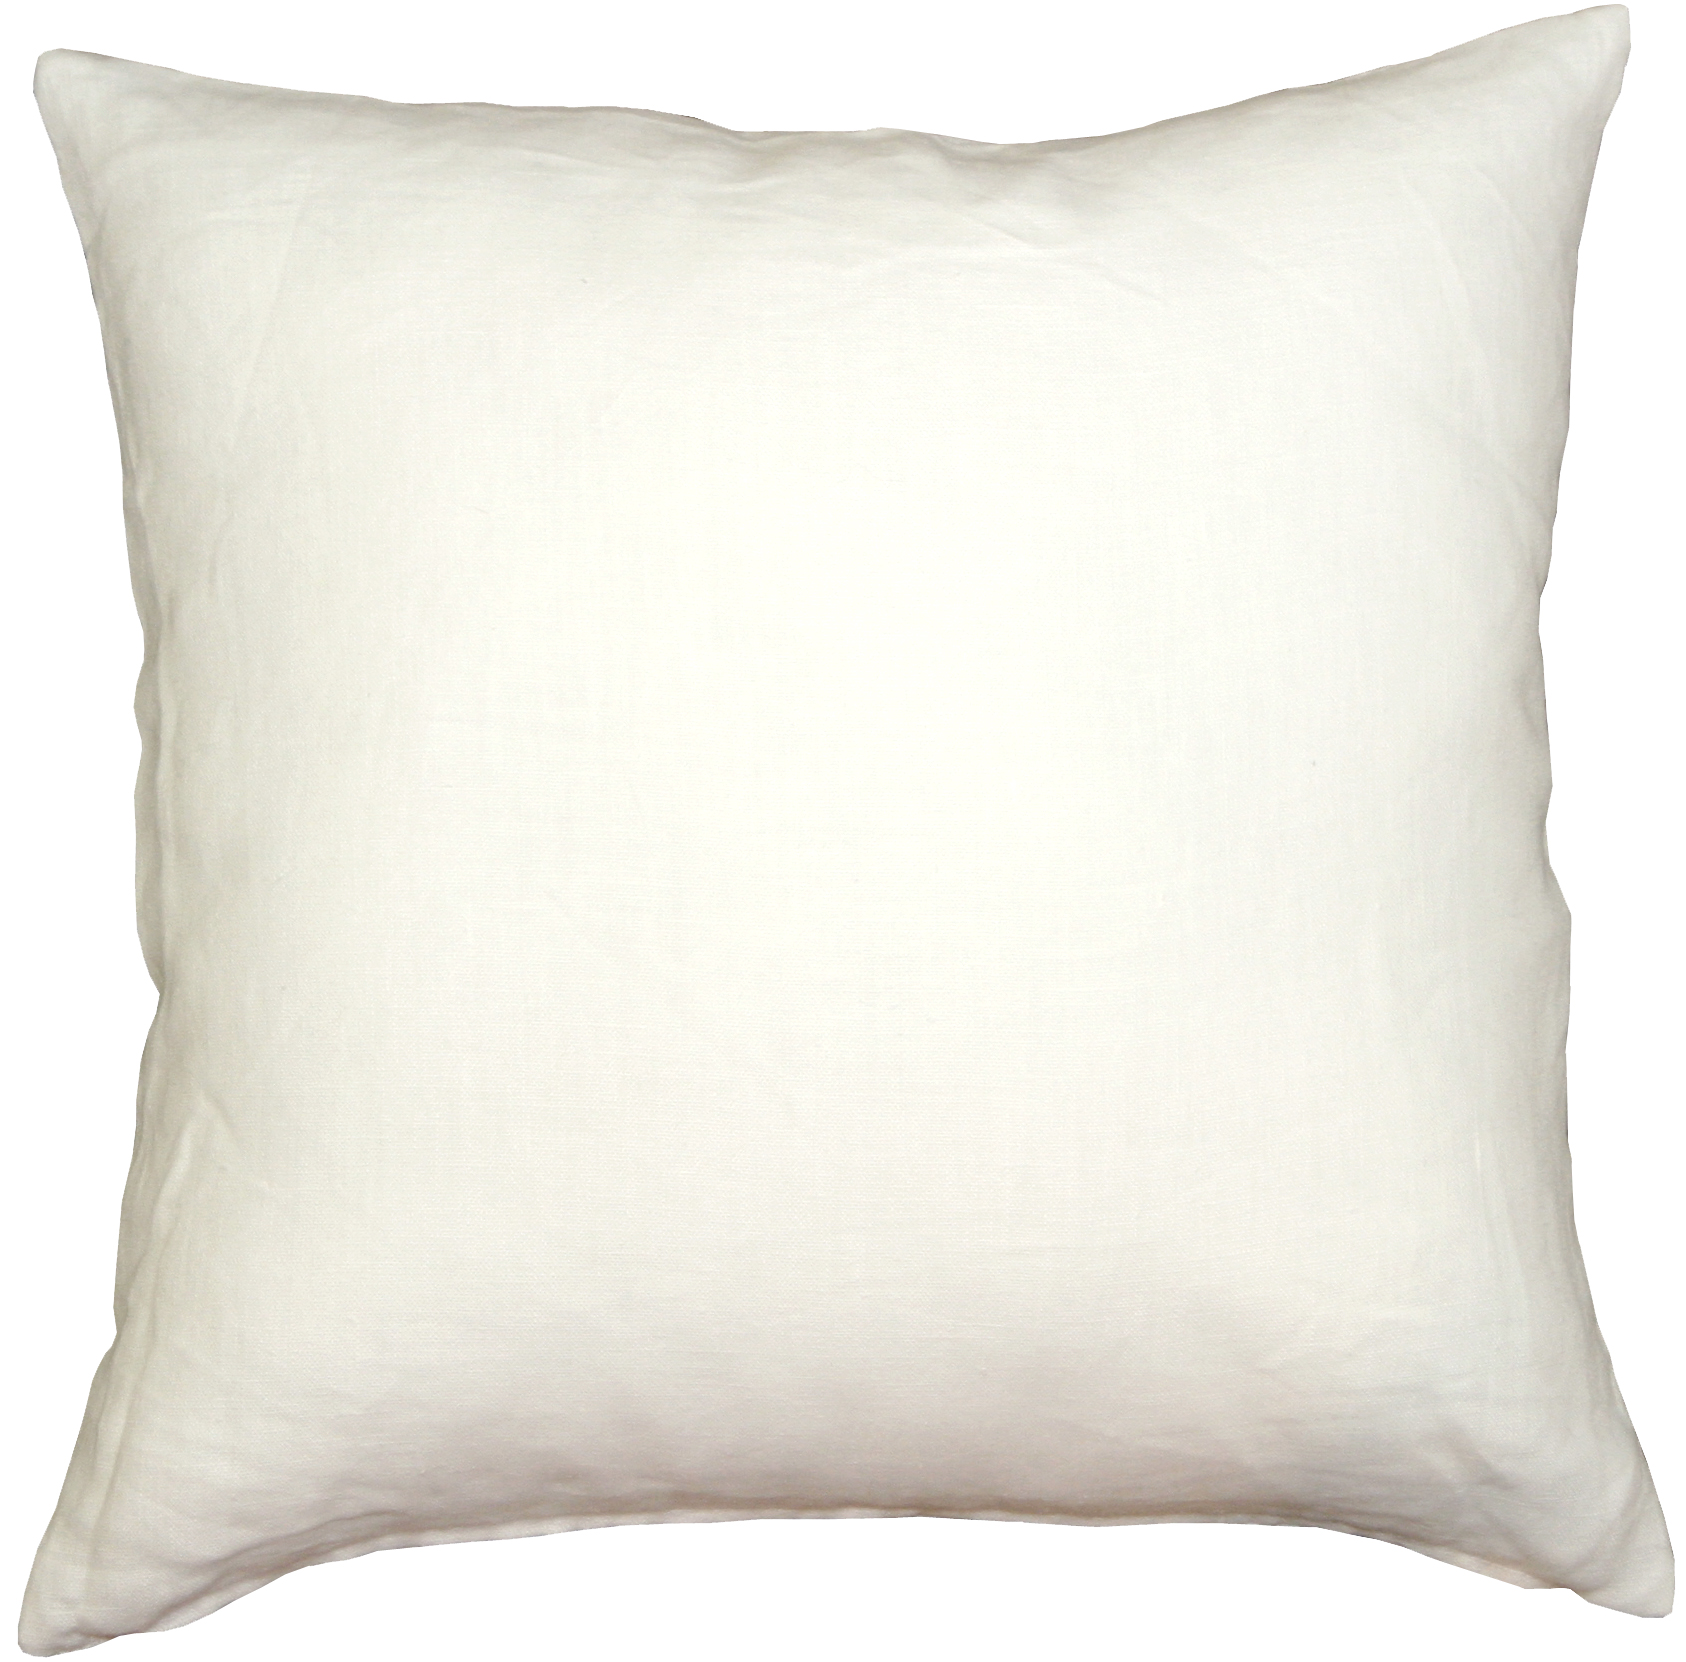 Solid White Linen Accent Pillows